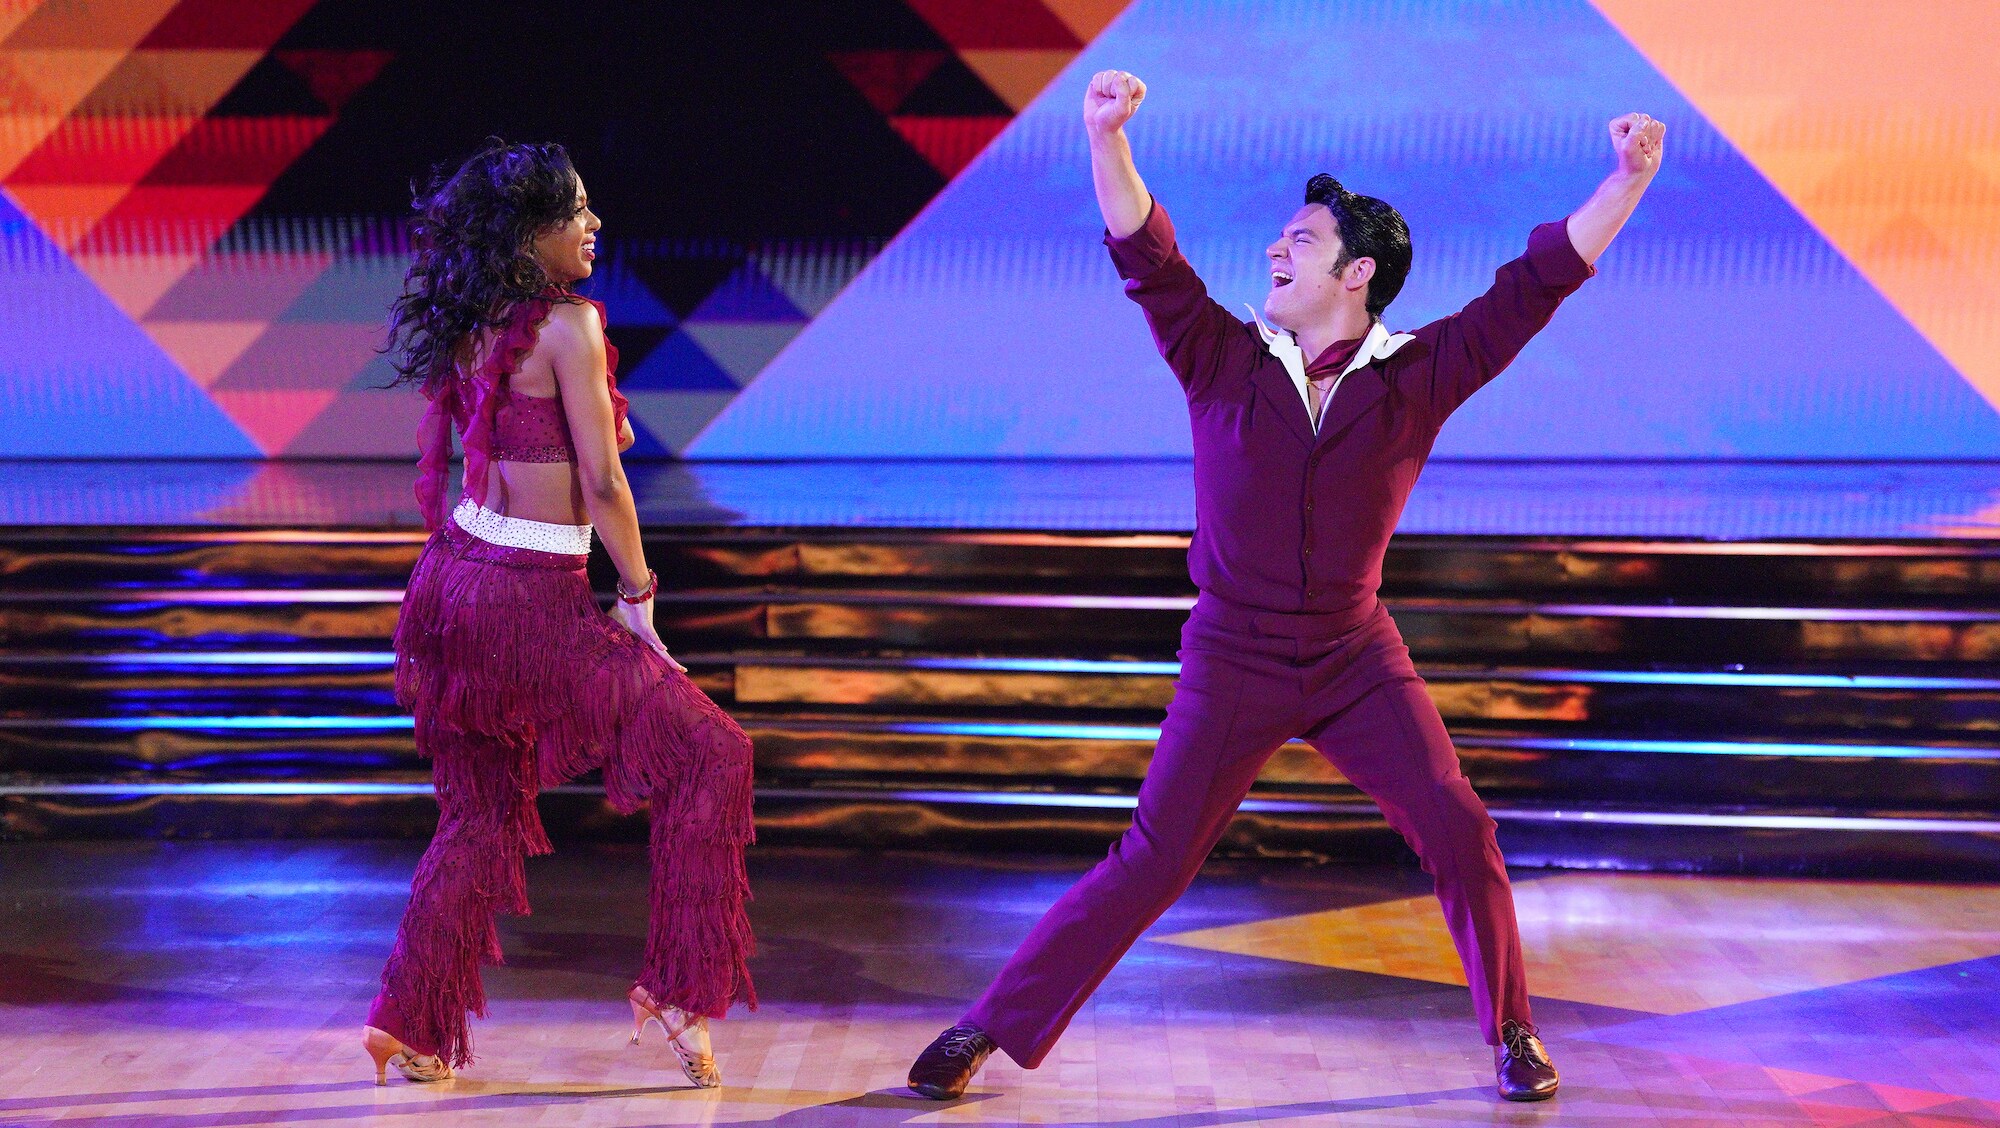 DANCING WITH THE STARS - “Elvis Night” –  The 15 remaining couples “Can’t Help Falling in Love” with Elvis this week as they take on all-new dance styles to music by The King of Rock ‘n’ Roll. Week two of the mirorrball competition will stream live MONDAY, SEPT. 26 (8:00pm ET / 5:00pm PT), on Disney+. (ABC/Christopher Willard) BRITT STEWART, DANIEL DURANT